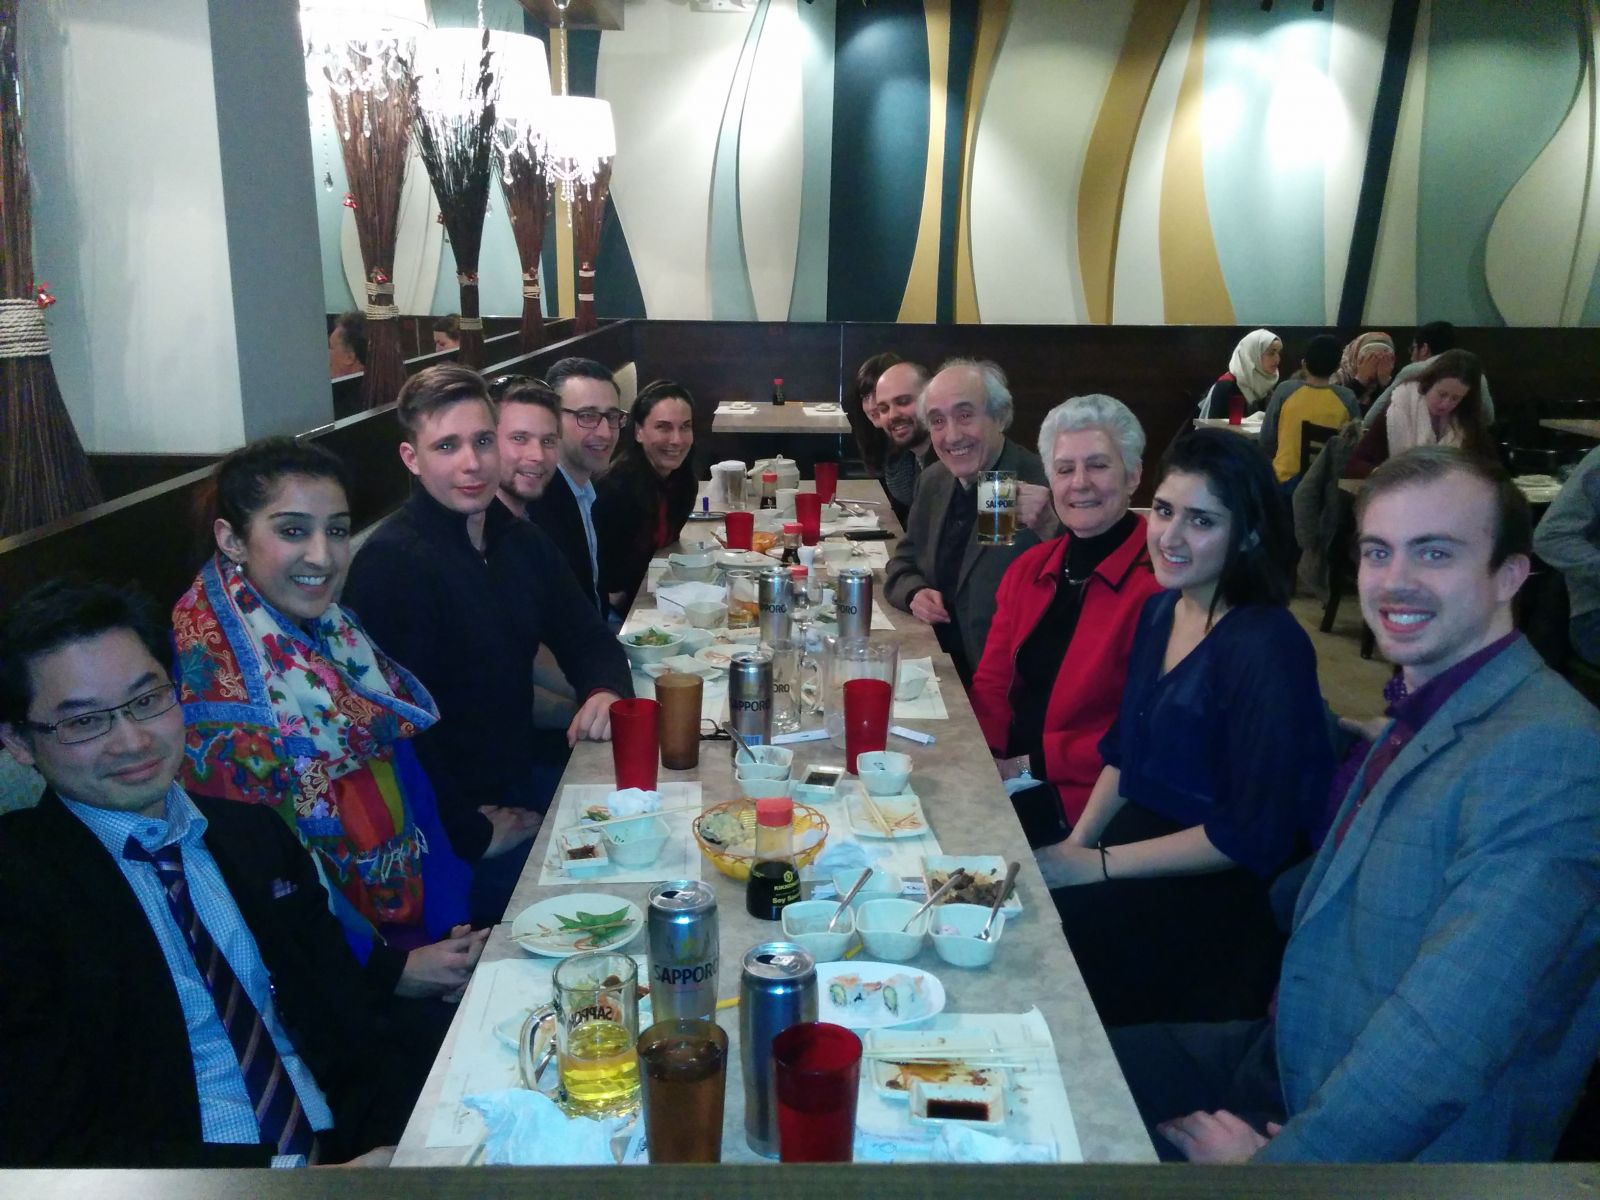 Lab members, Dr. Pascual-Leone, and faculty members seated at a restaurant